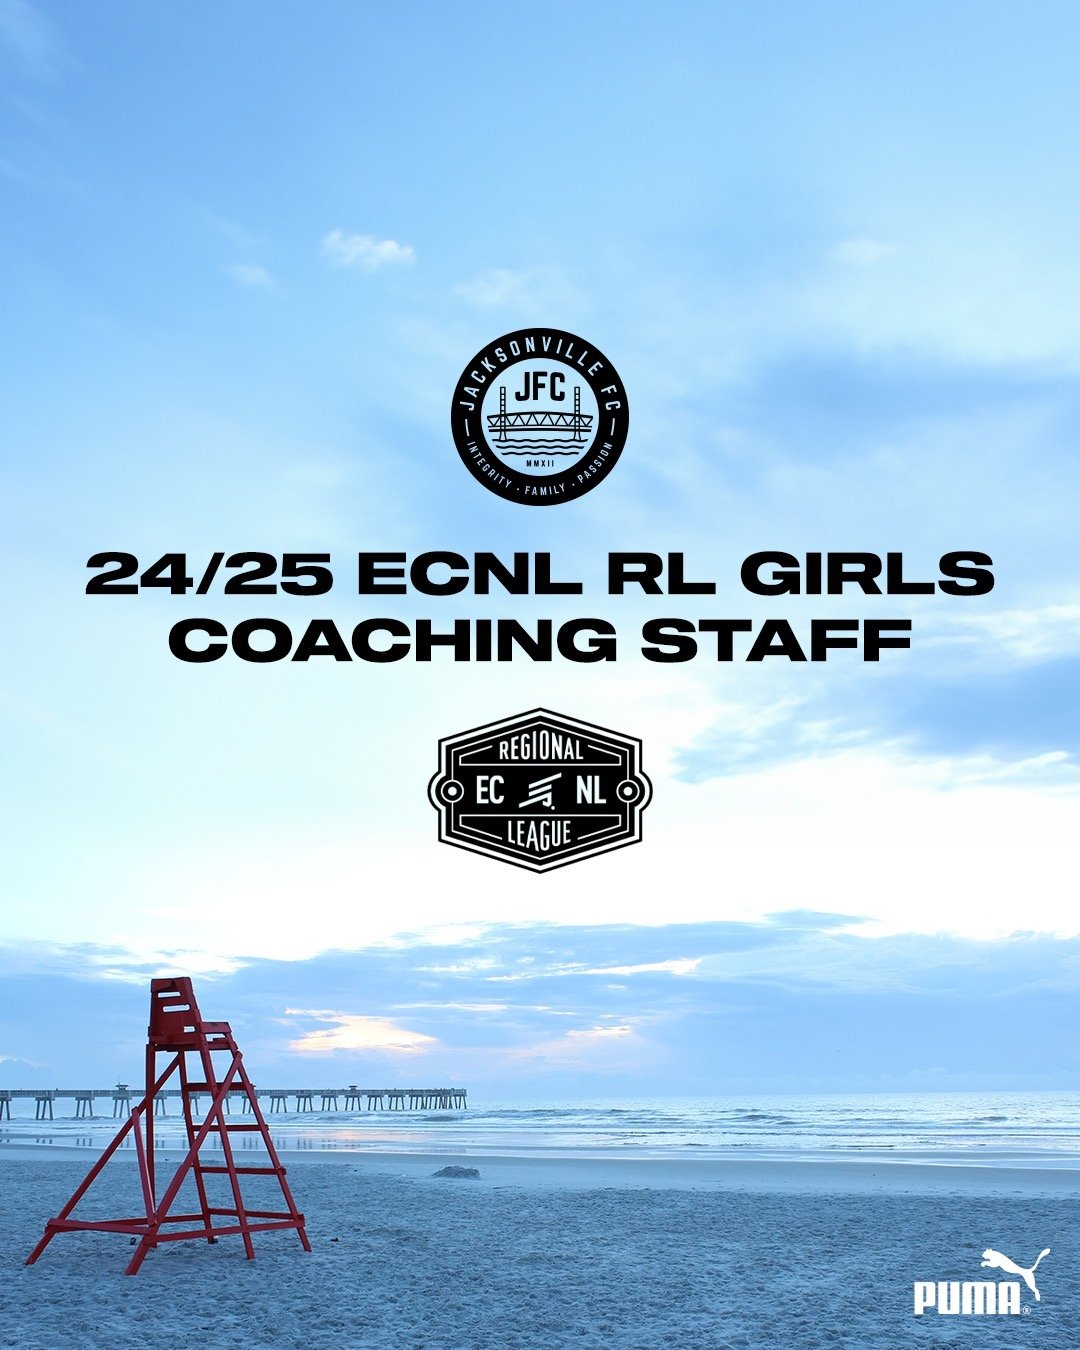 With no further delay...here is our JFC ECNL RL Girls Coaching Staff. We are looking forward to an amazing 24/25 season!!!

#PlayerDriven #904JFC